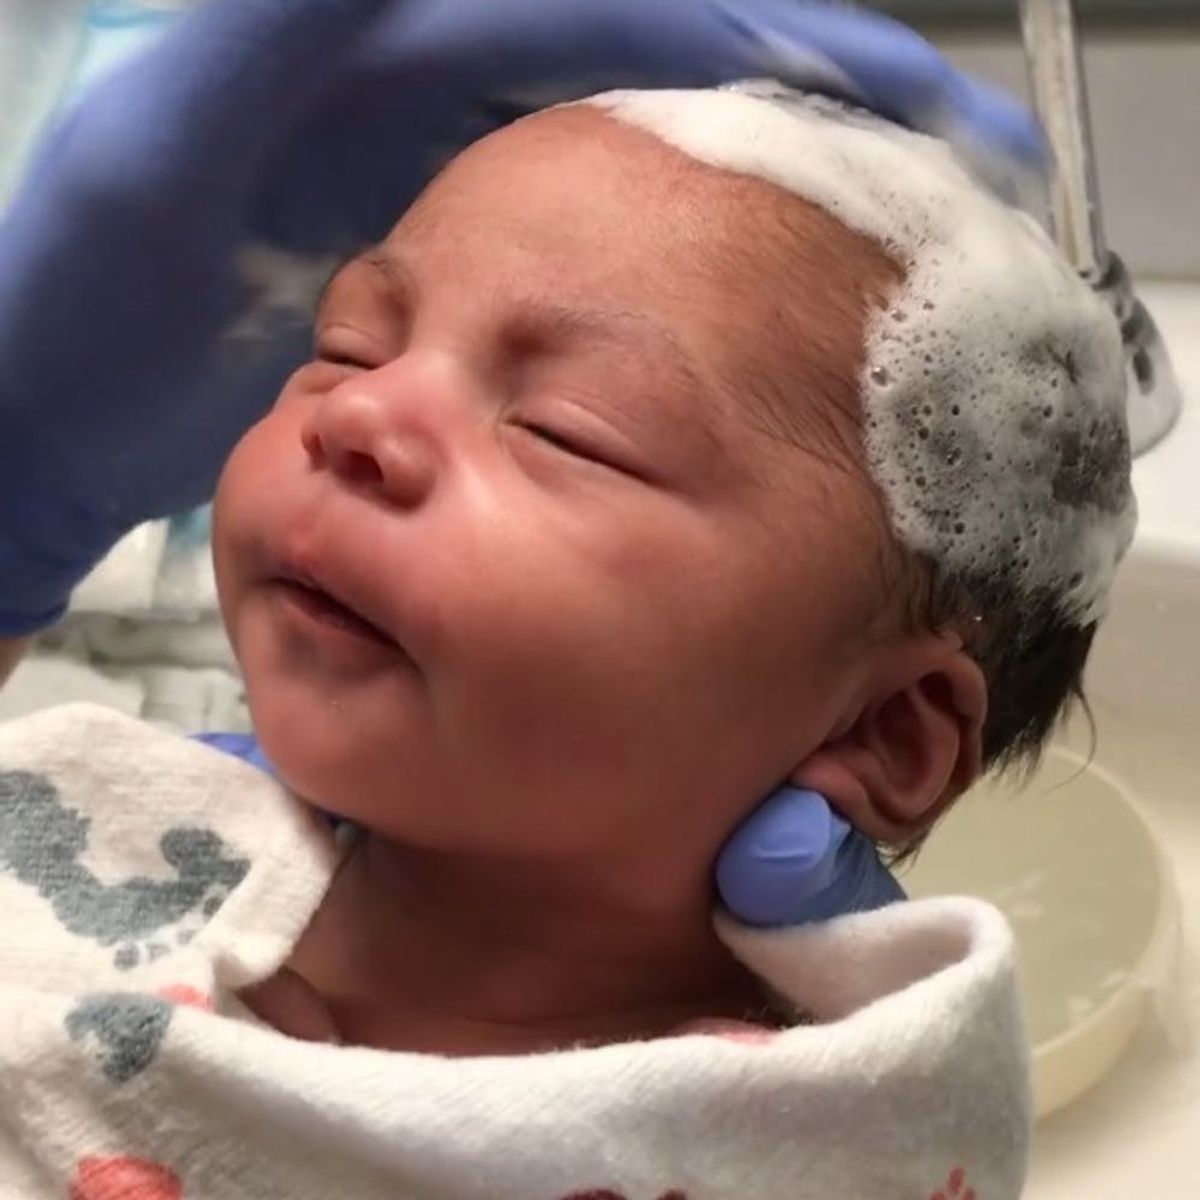 This Newborn Baby’s Reaction to Getting Her Hair Washed Is Almost Too Sweet to Handle